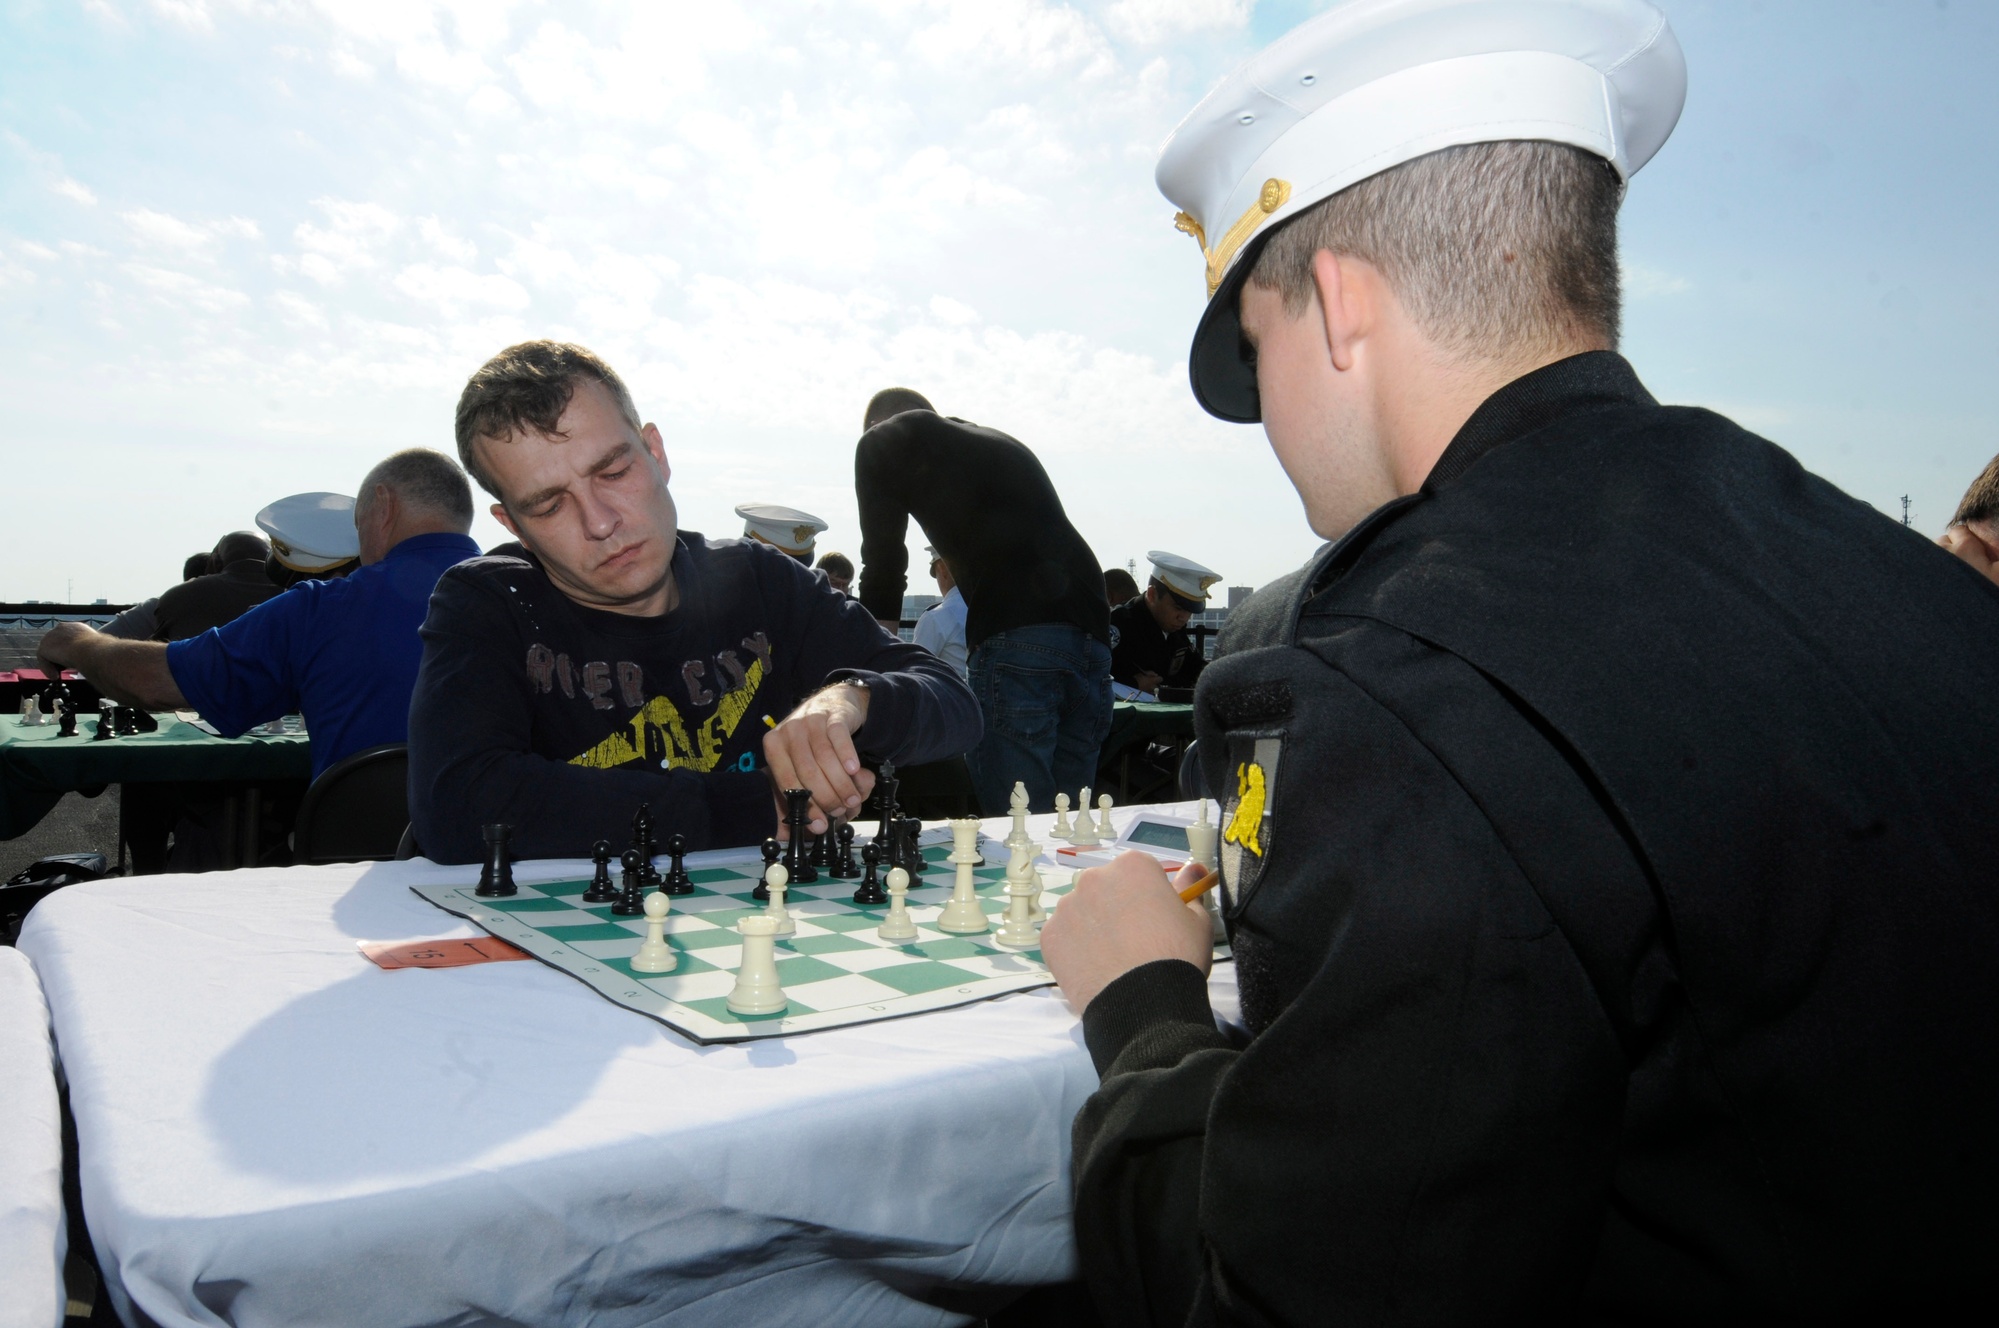 DVIDS - Images - US Armed Forces Open Chess Championship [Image 3